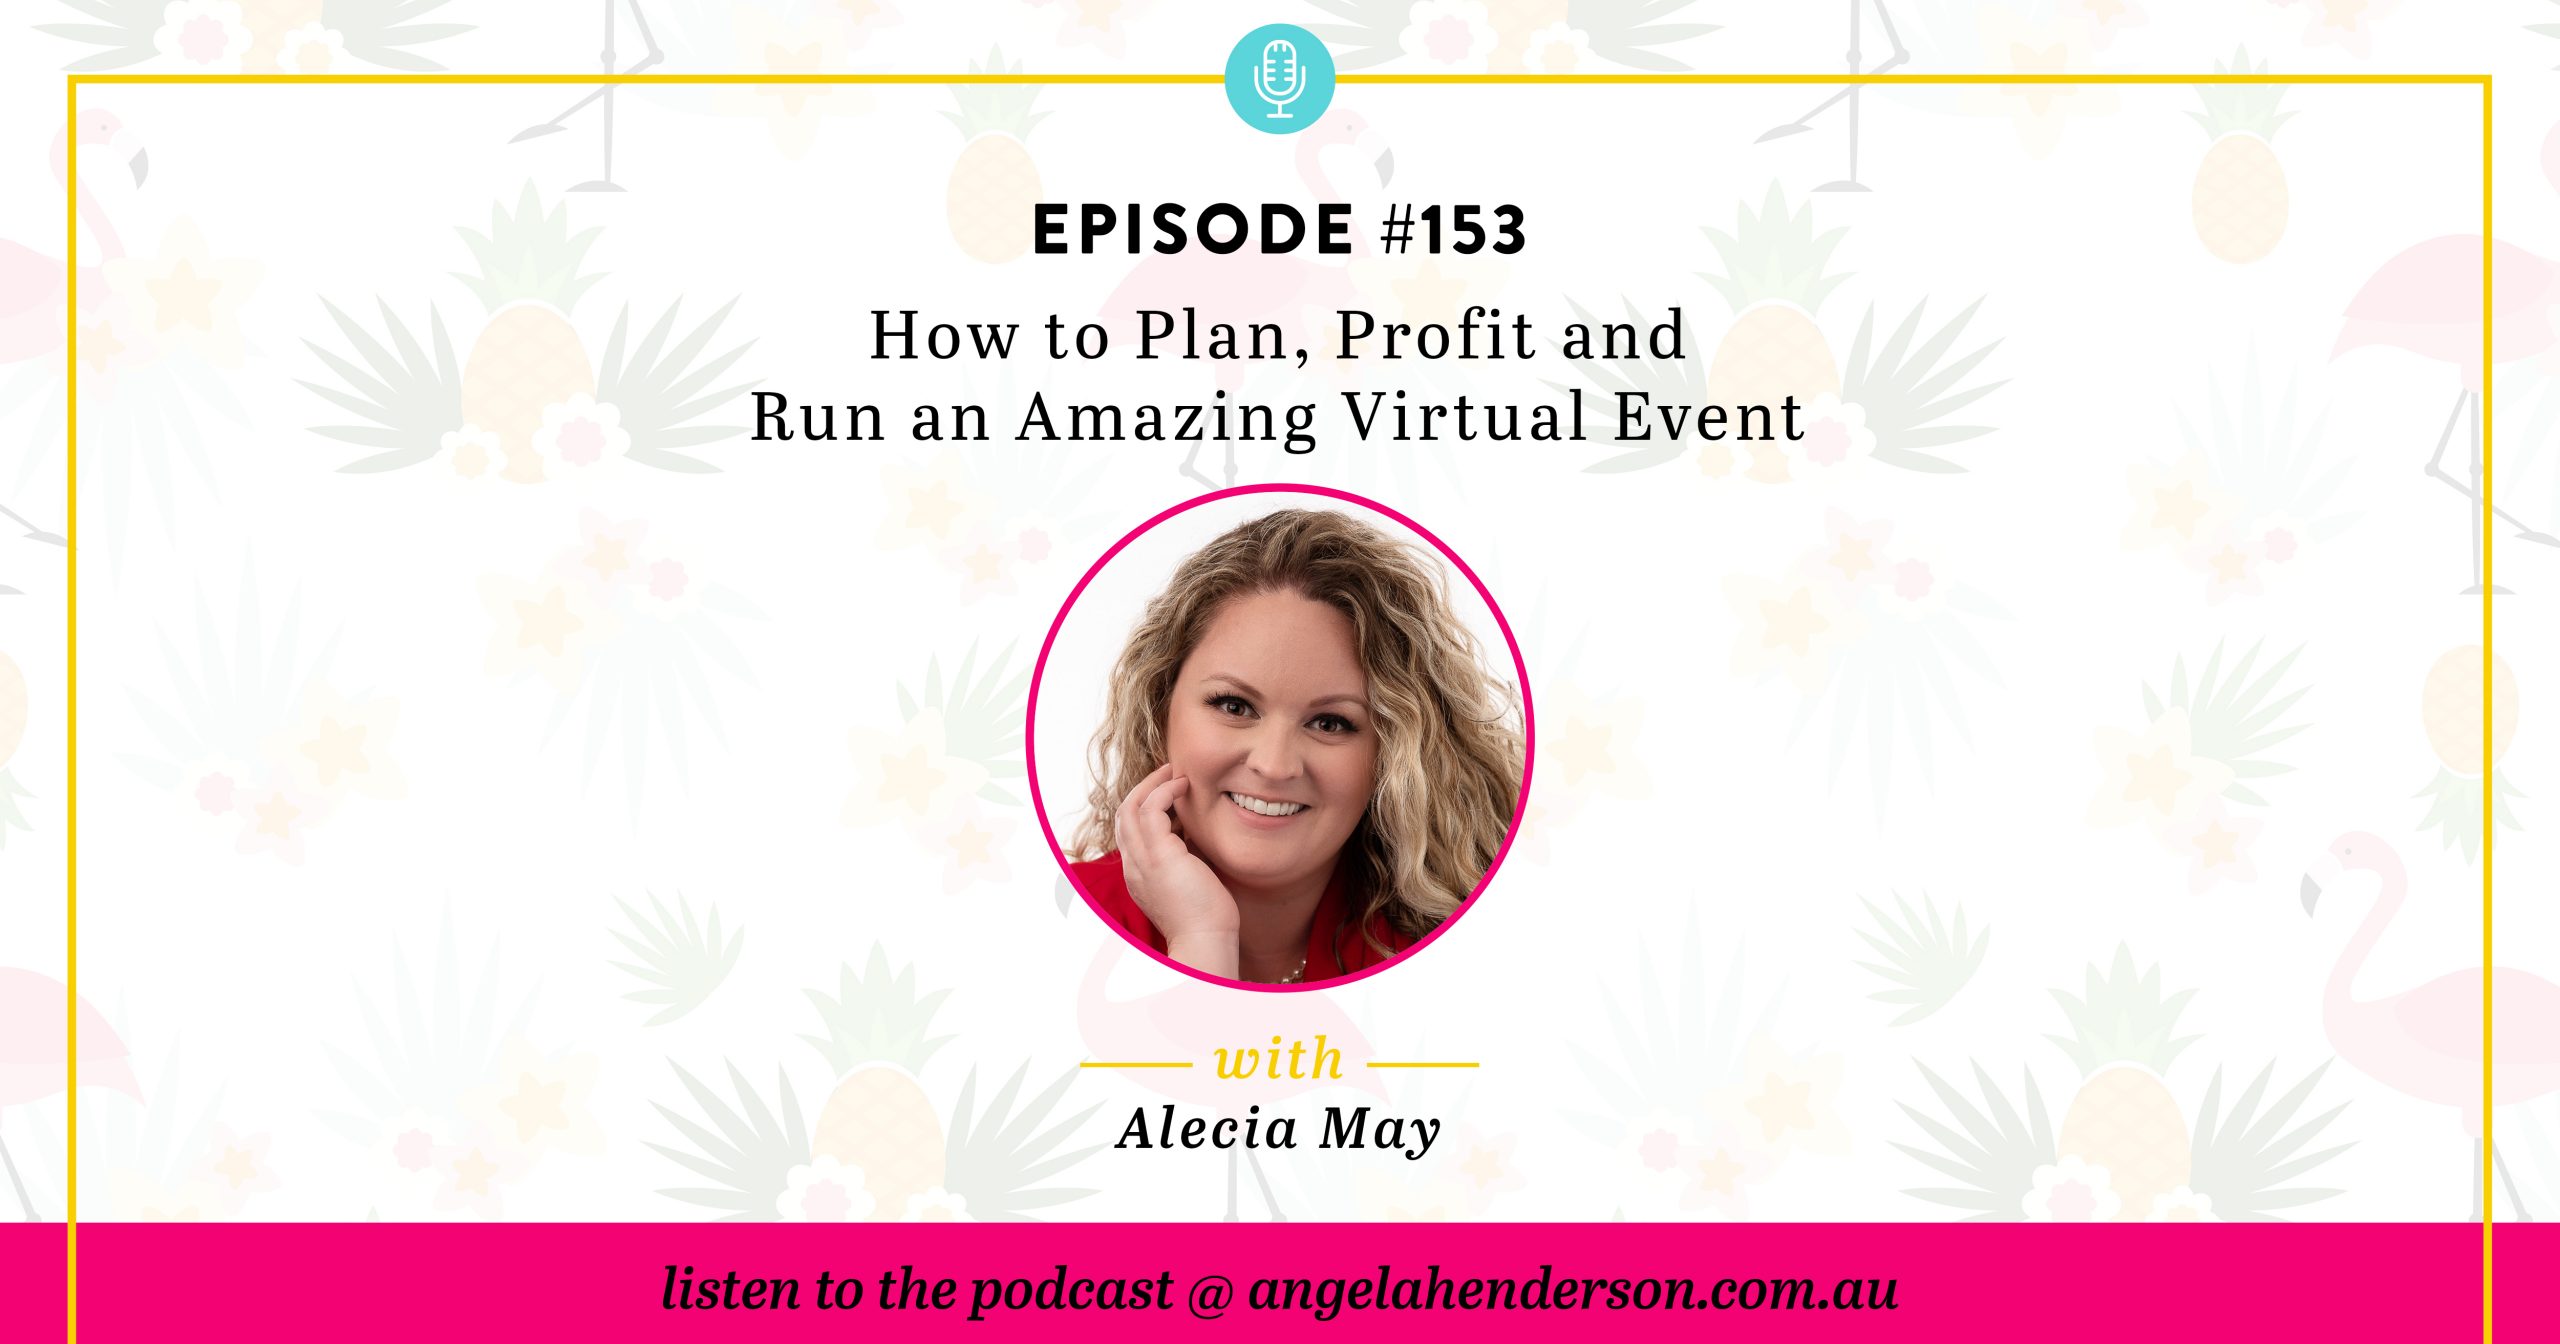 How to Plan, Profit and Run an Amazing Virtual Event